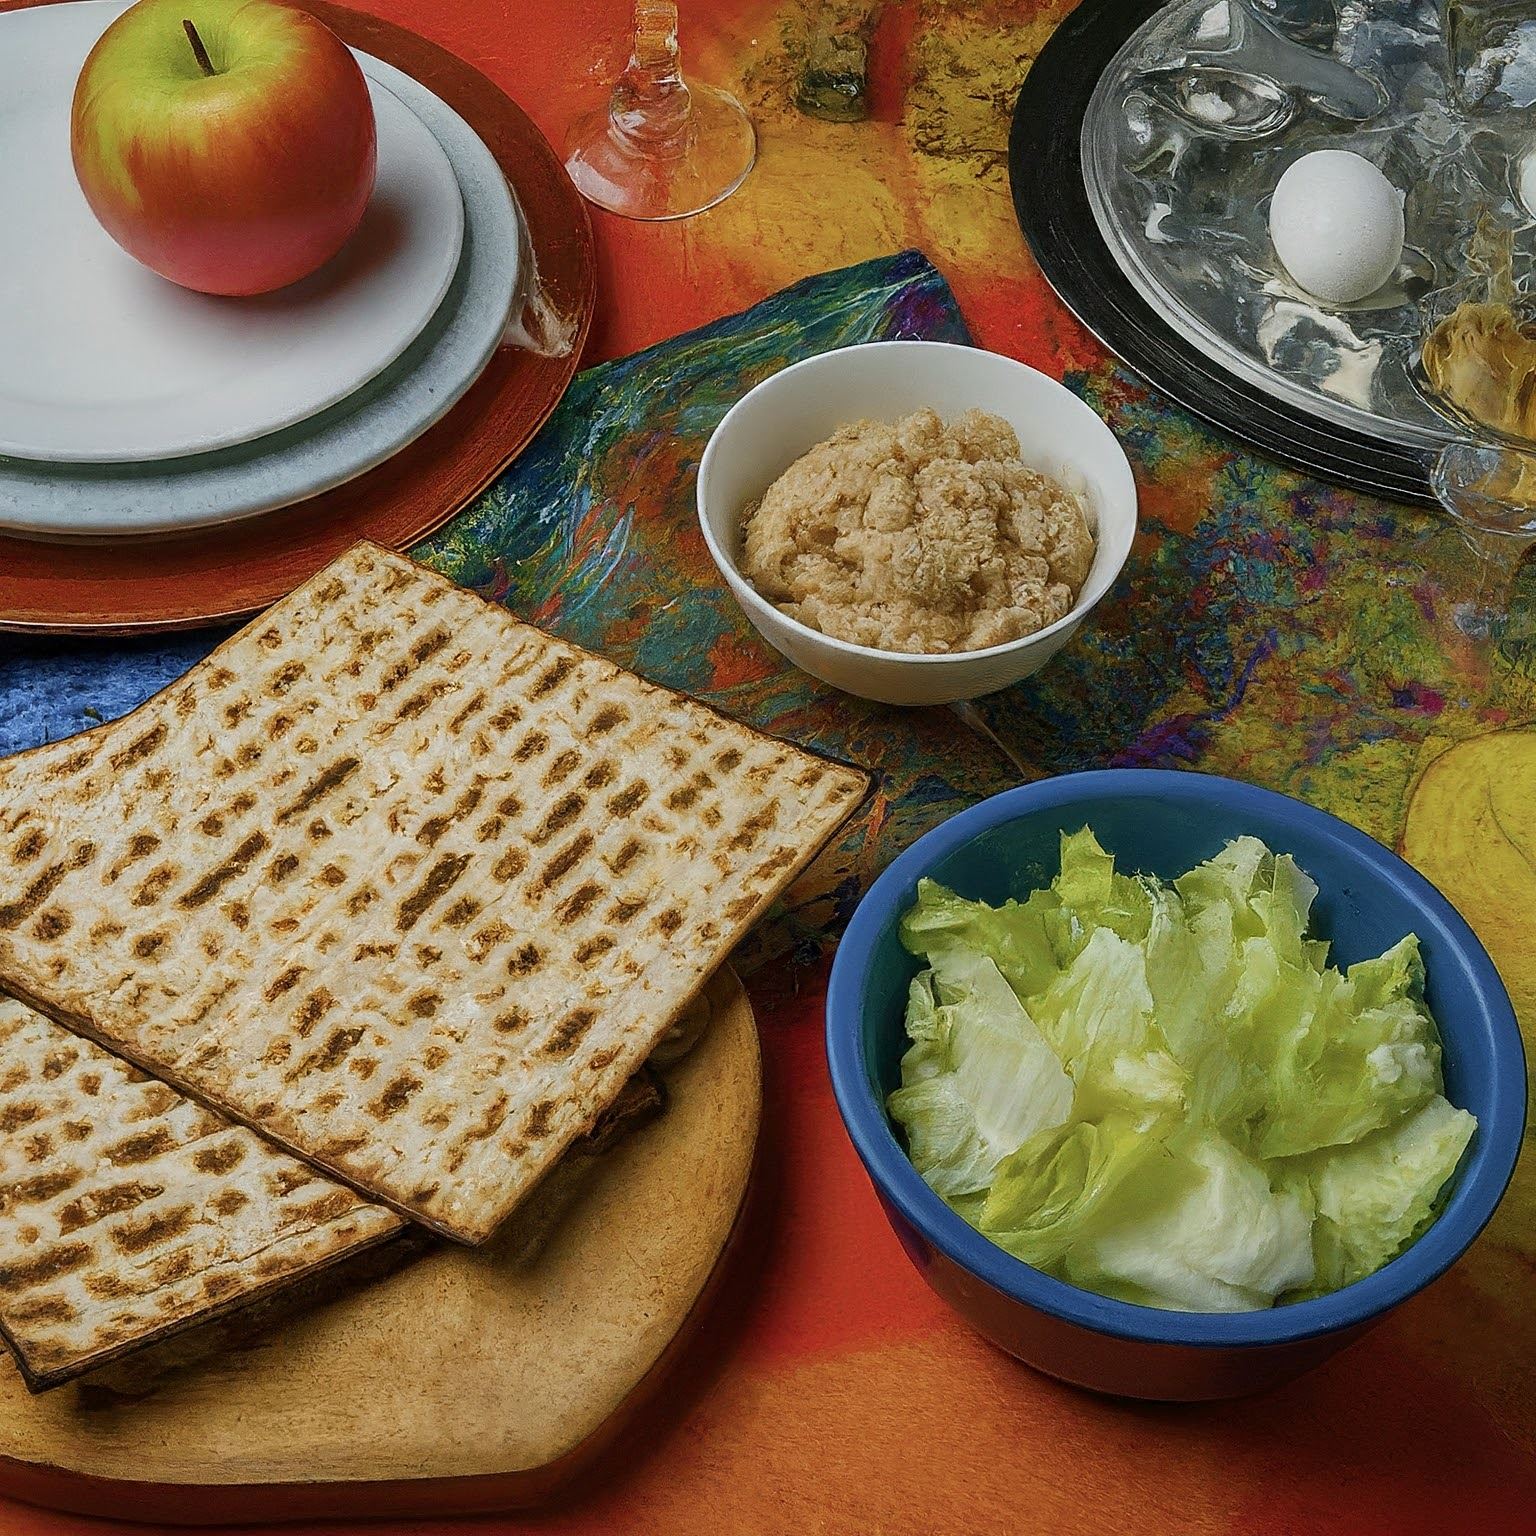 Colorful Passover Seder table with matzo, apple, and horseradish.